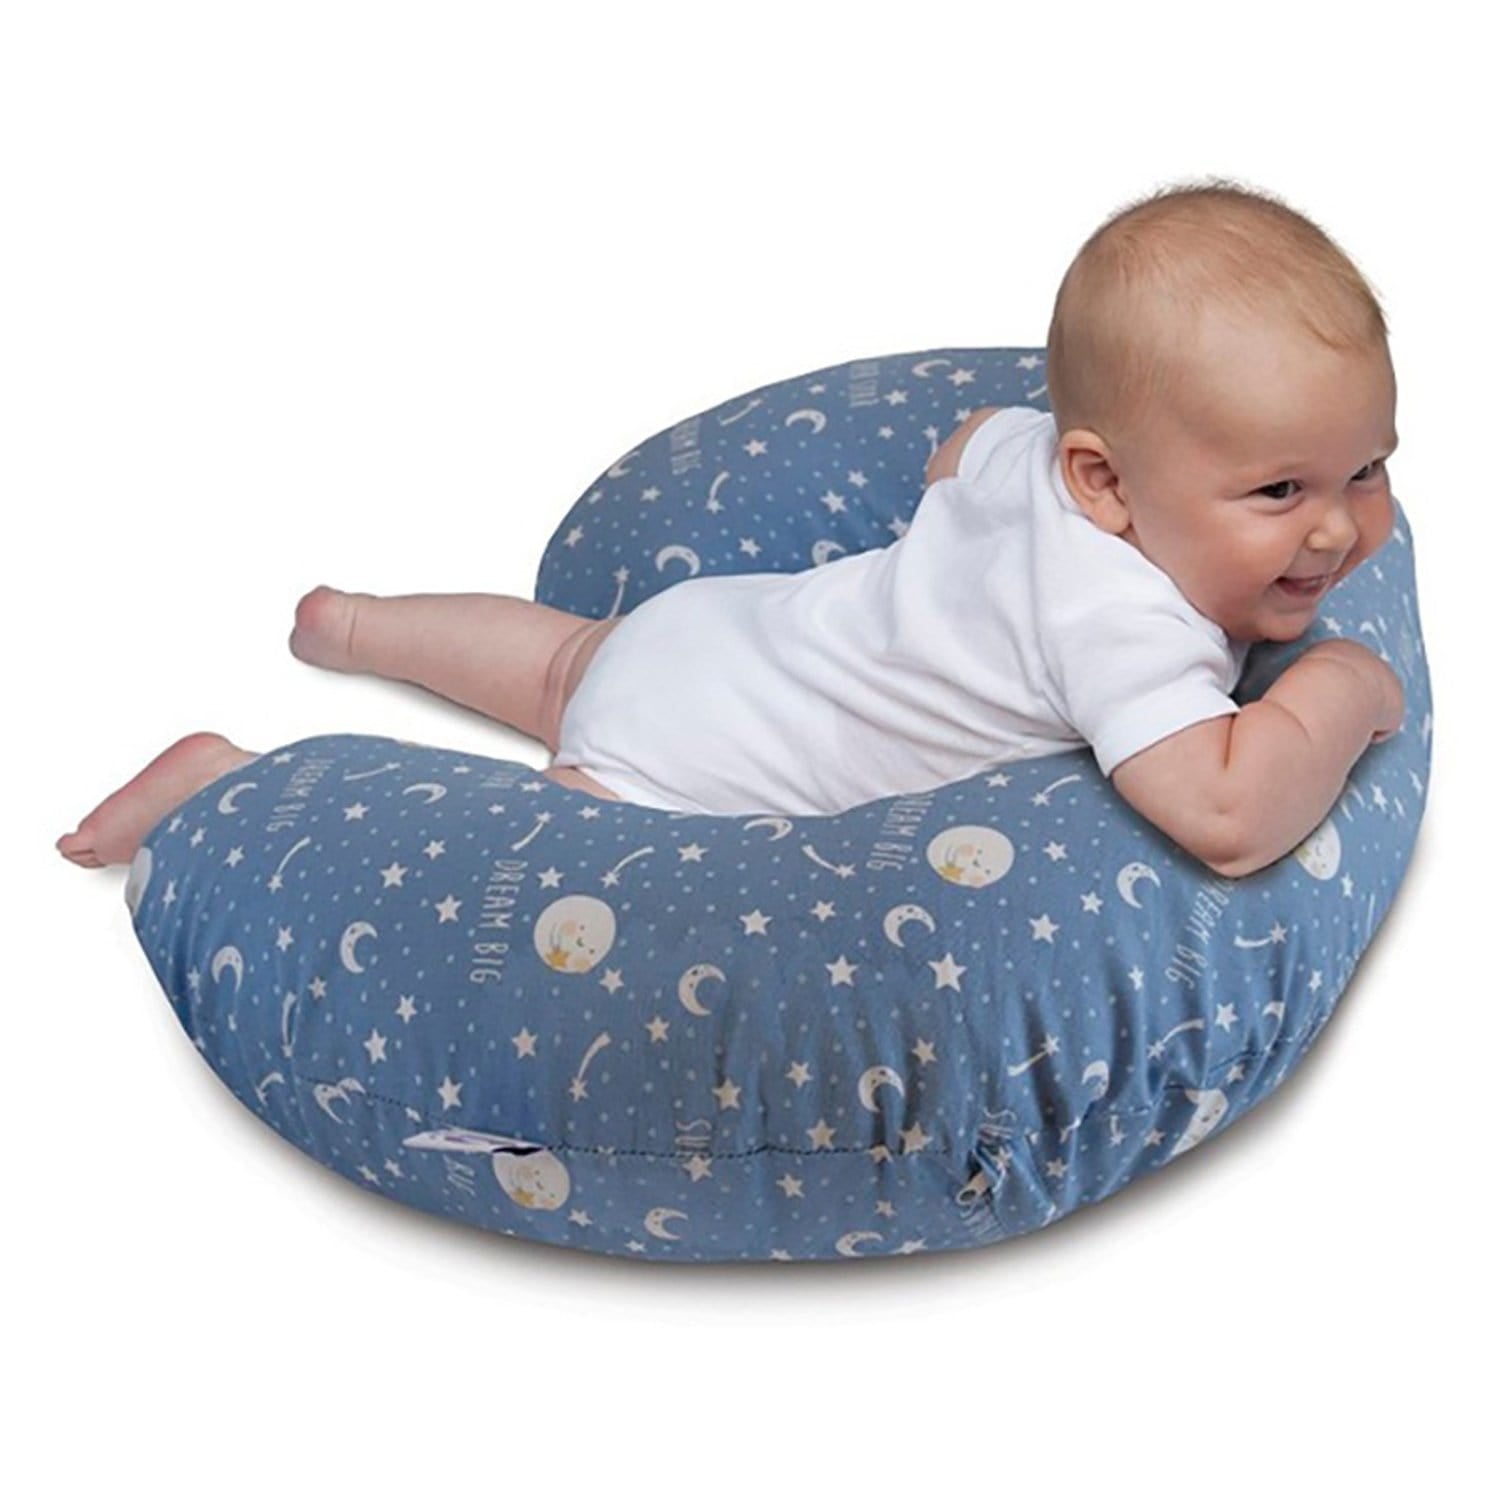 CHICCO BOPPY PILLOW WITH COTTON SLIPCOVER MOON AND STARS